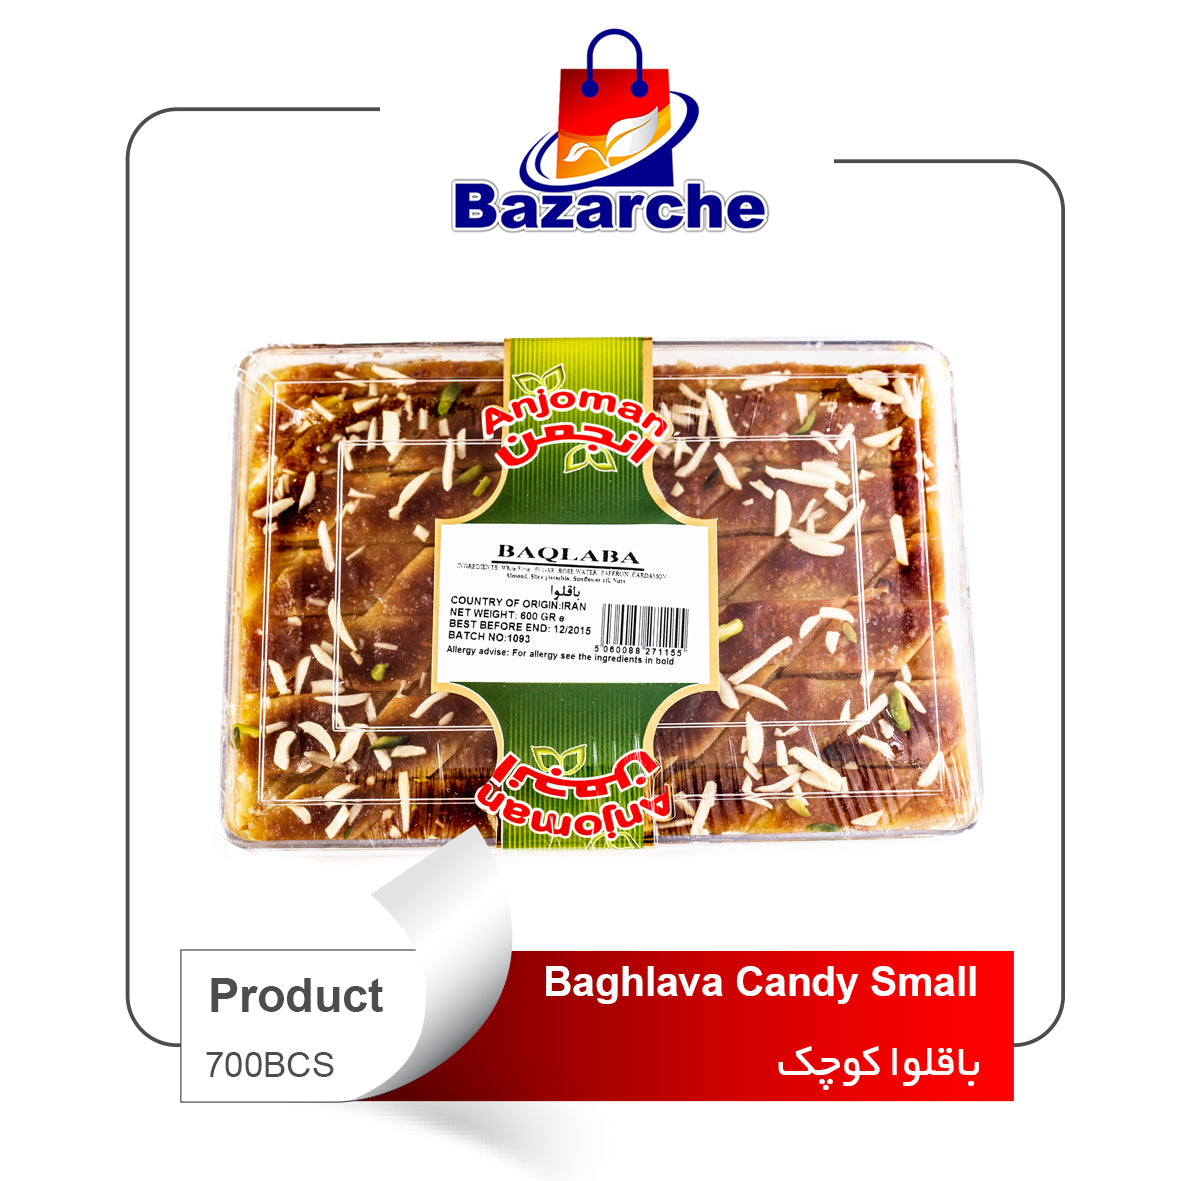 Baghlava Candy Small